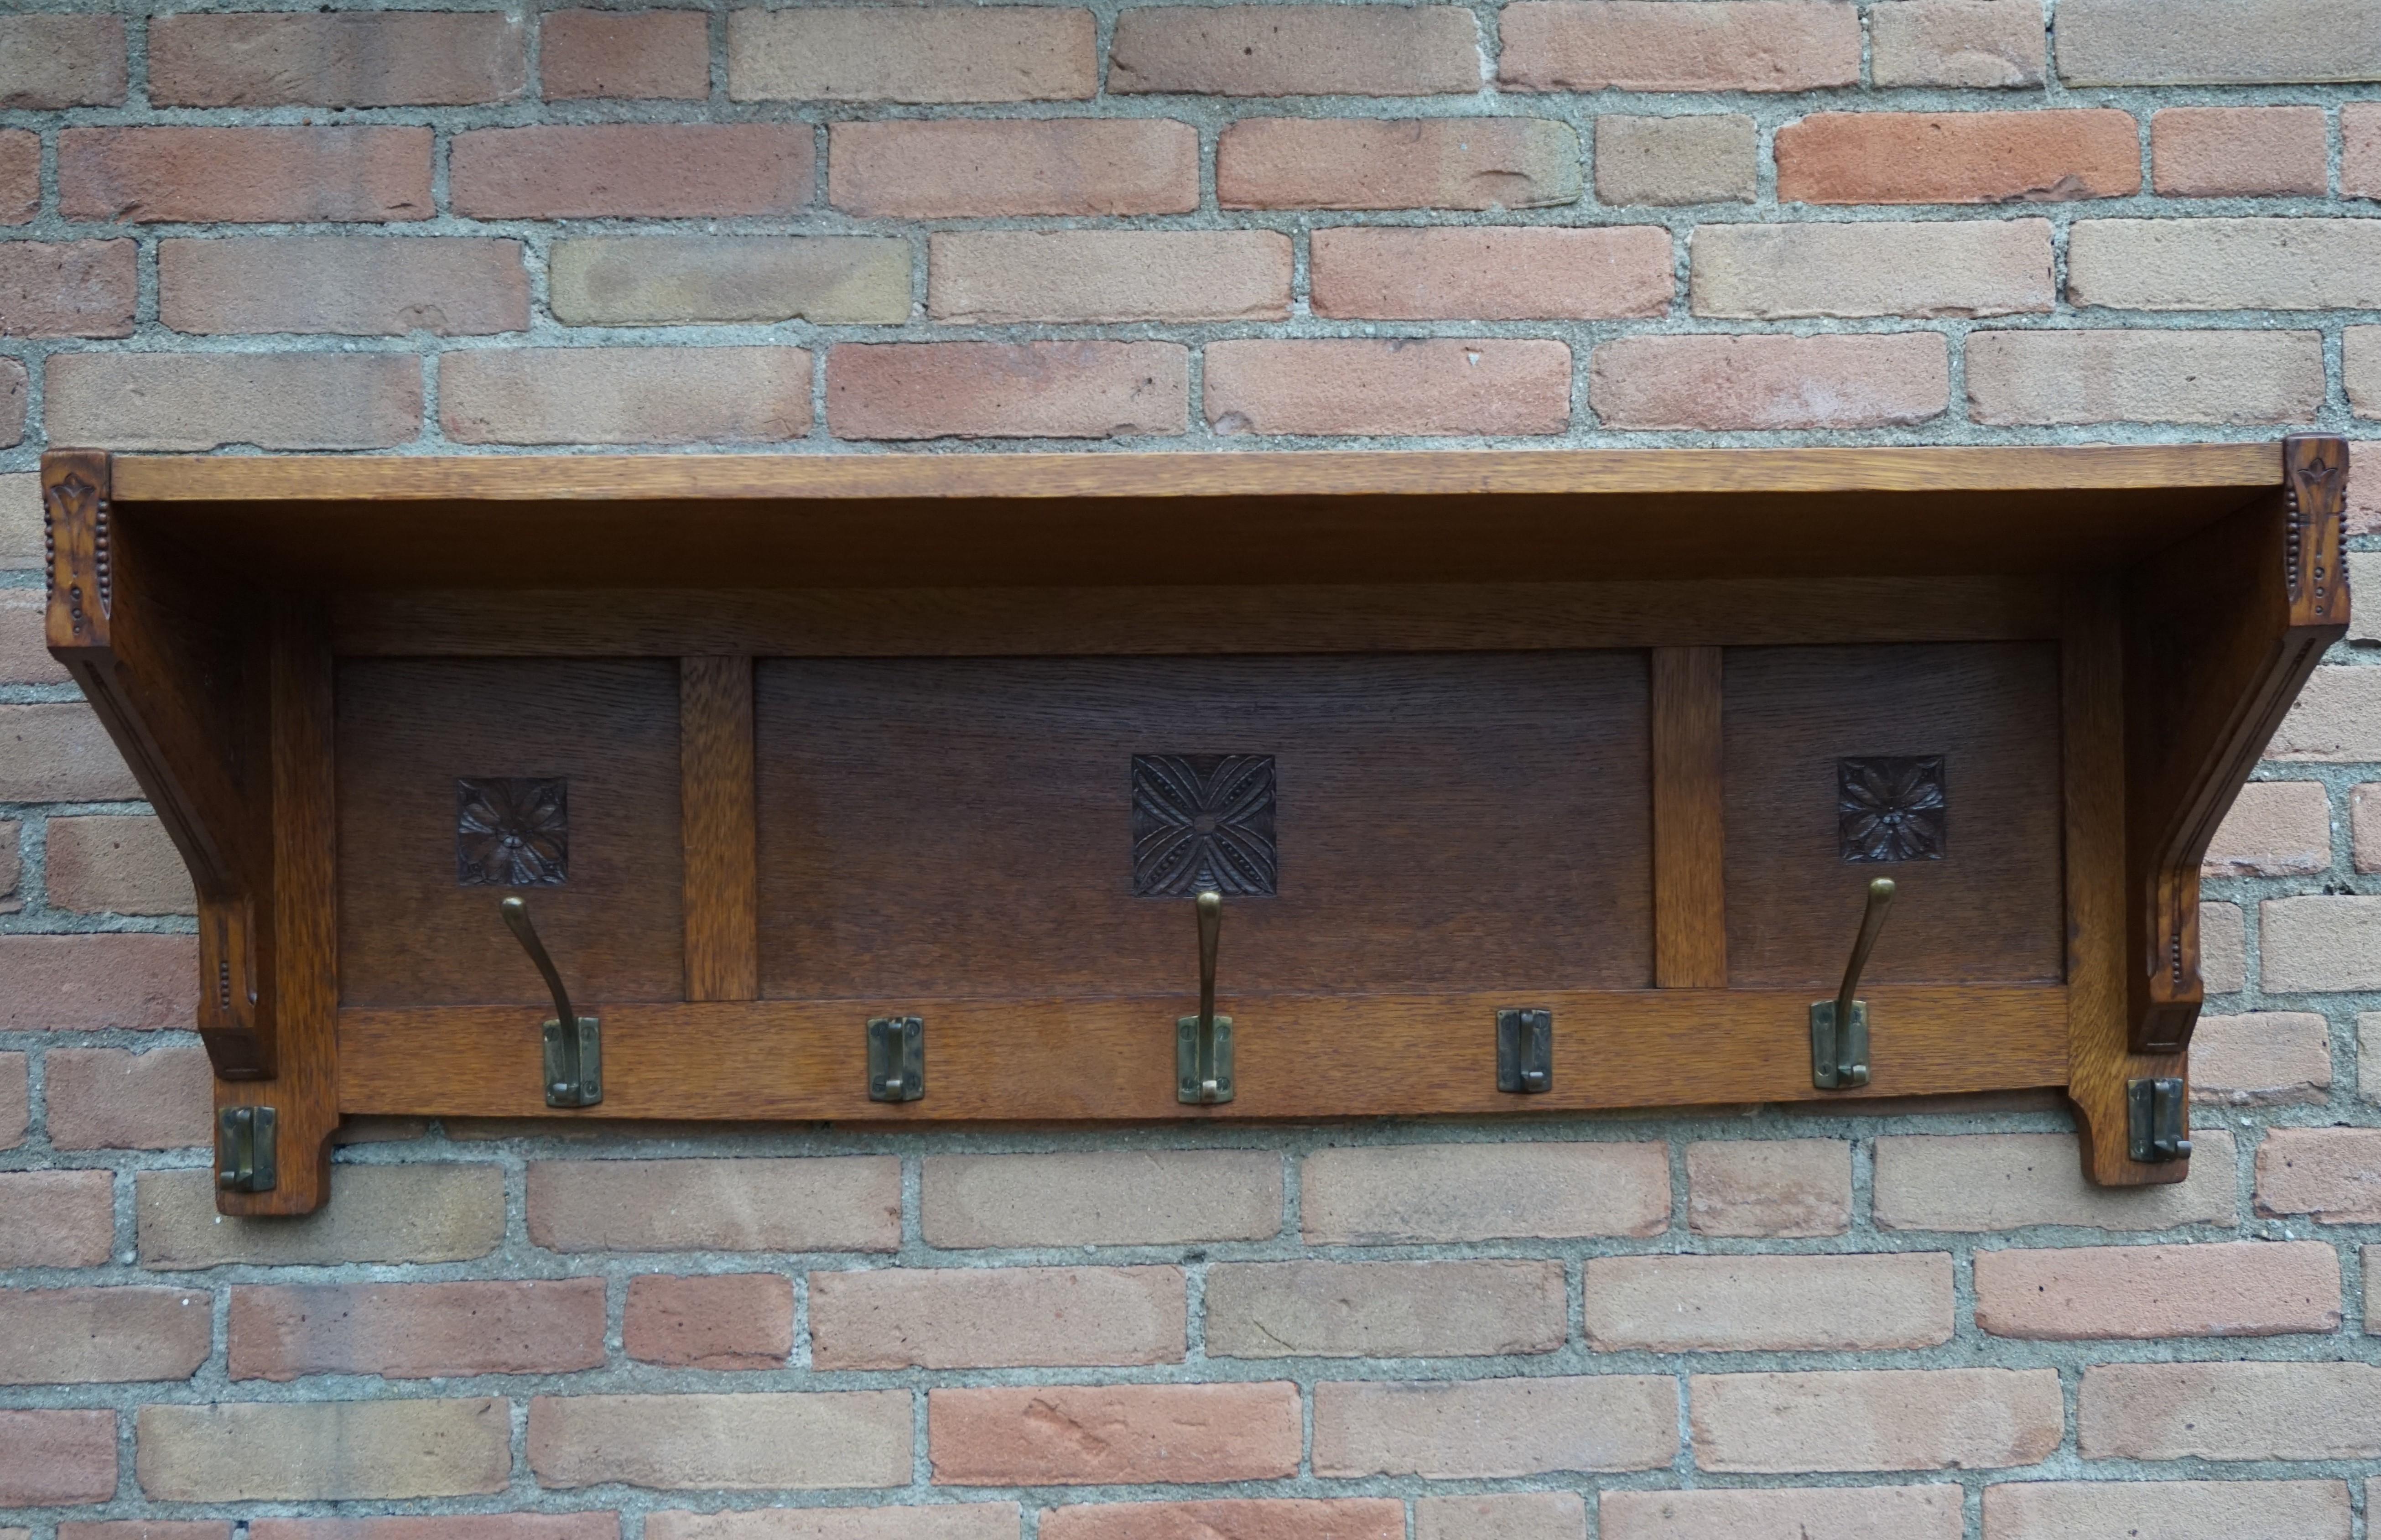 Stunning and excellent condition antique coat rack.

If you are a collector of handcrafted, early 20th century beauty then this striking antique could be gracing your entrance soon. This typical Dutch Arts & Crafts coat rack from 1900-1910 is